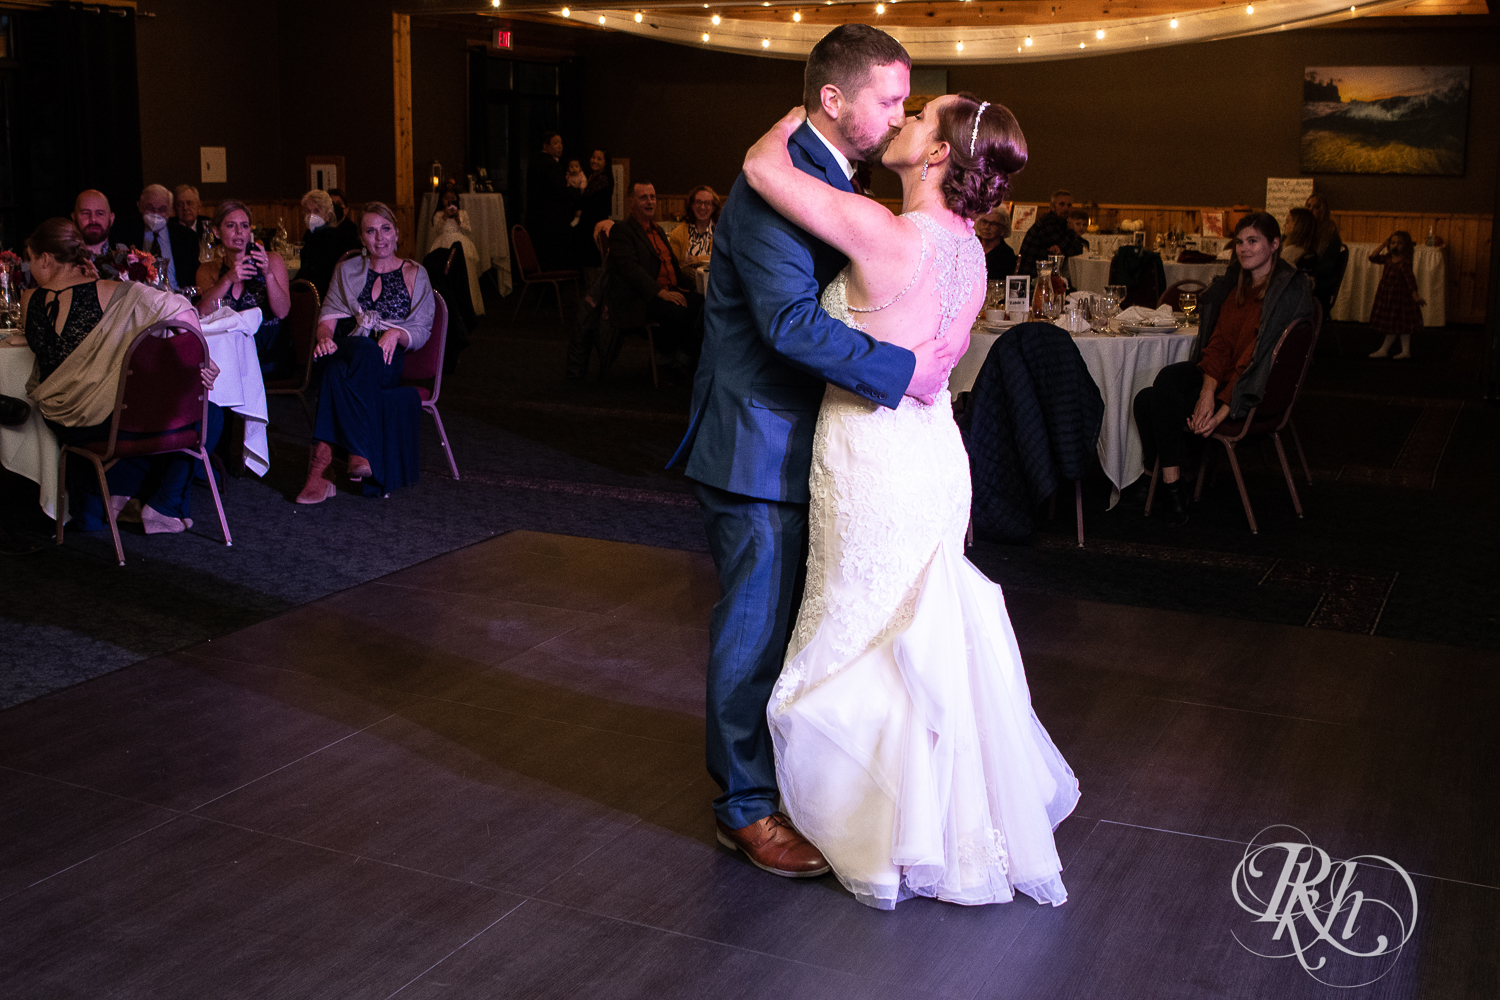 Bride and groom share first dance at Superior Shores Resort in Two Harbors, Minnesota.